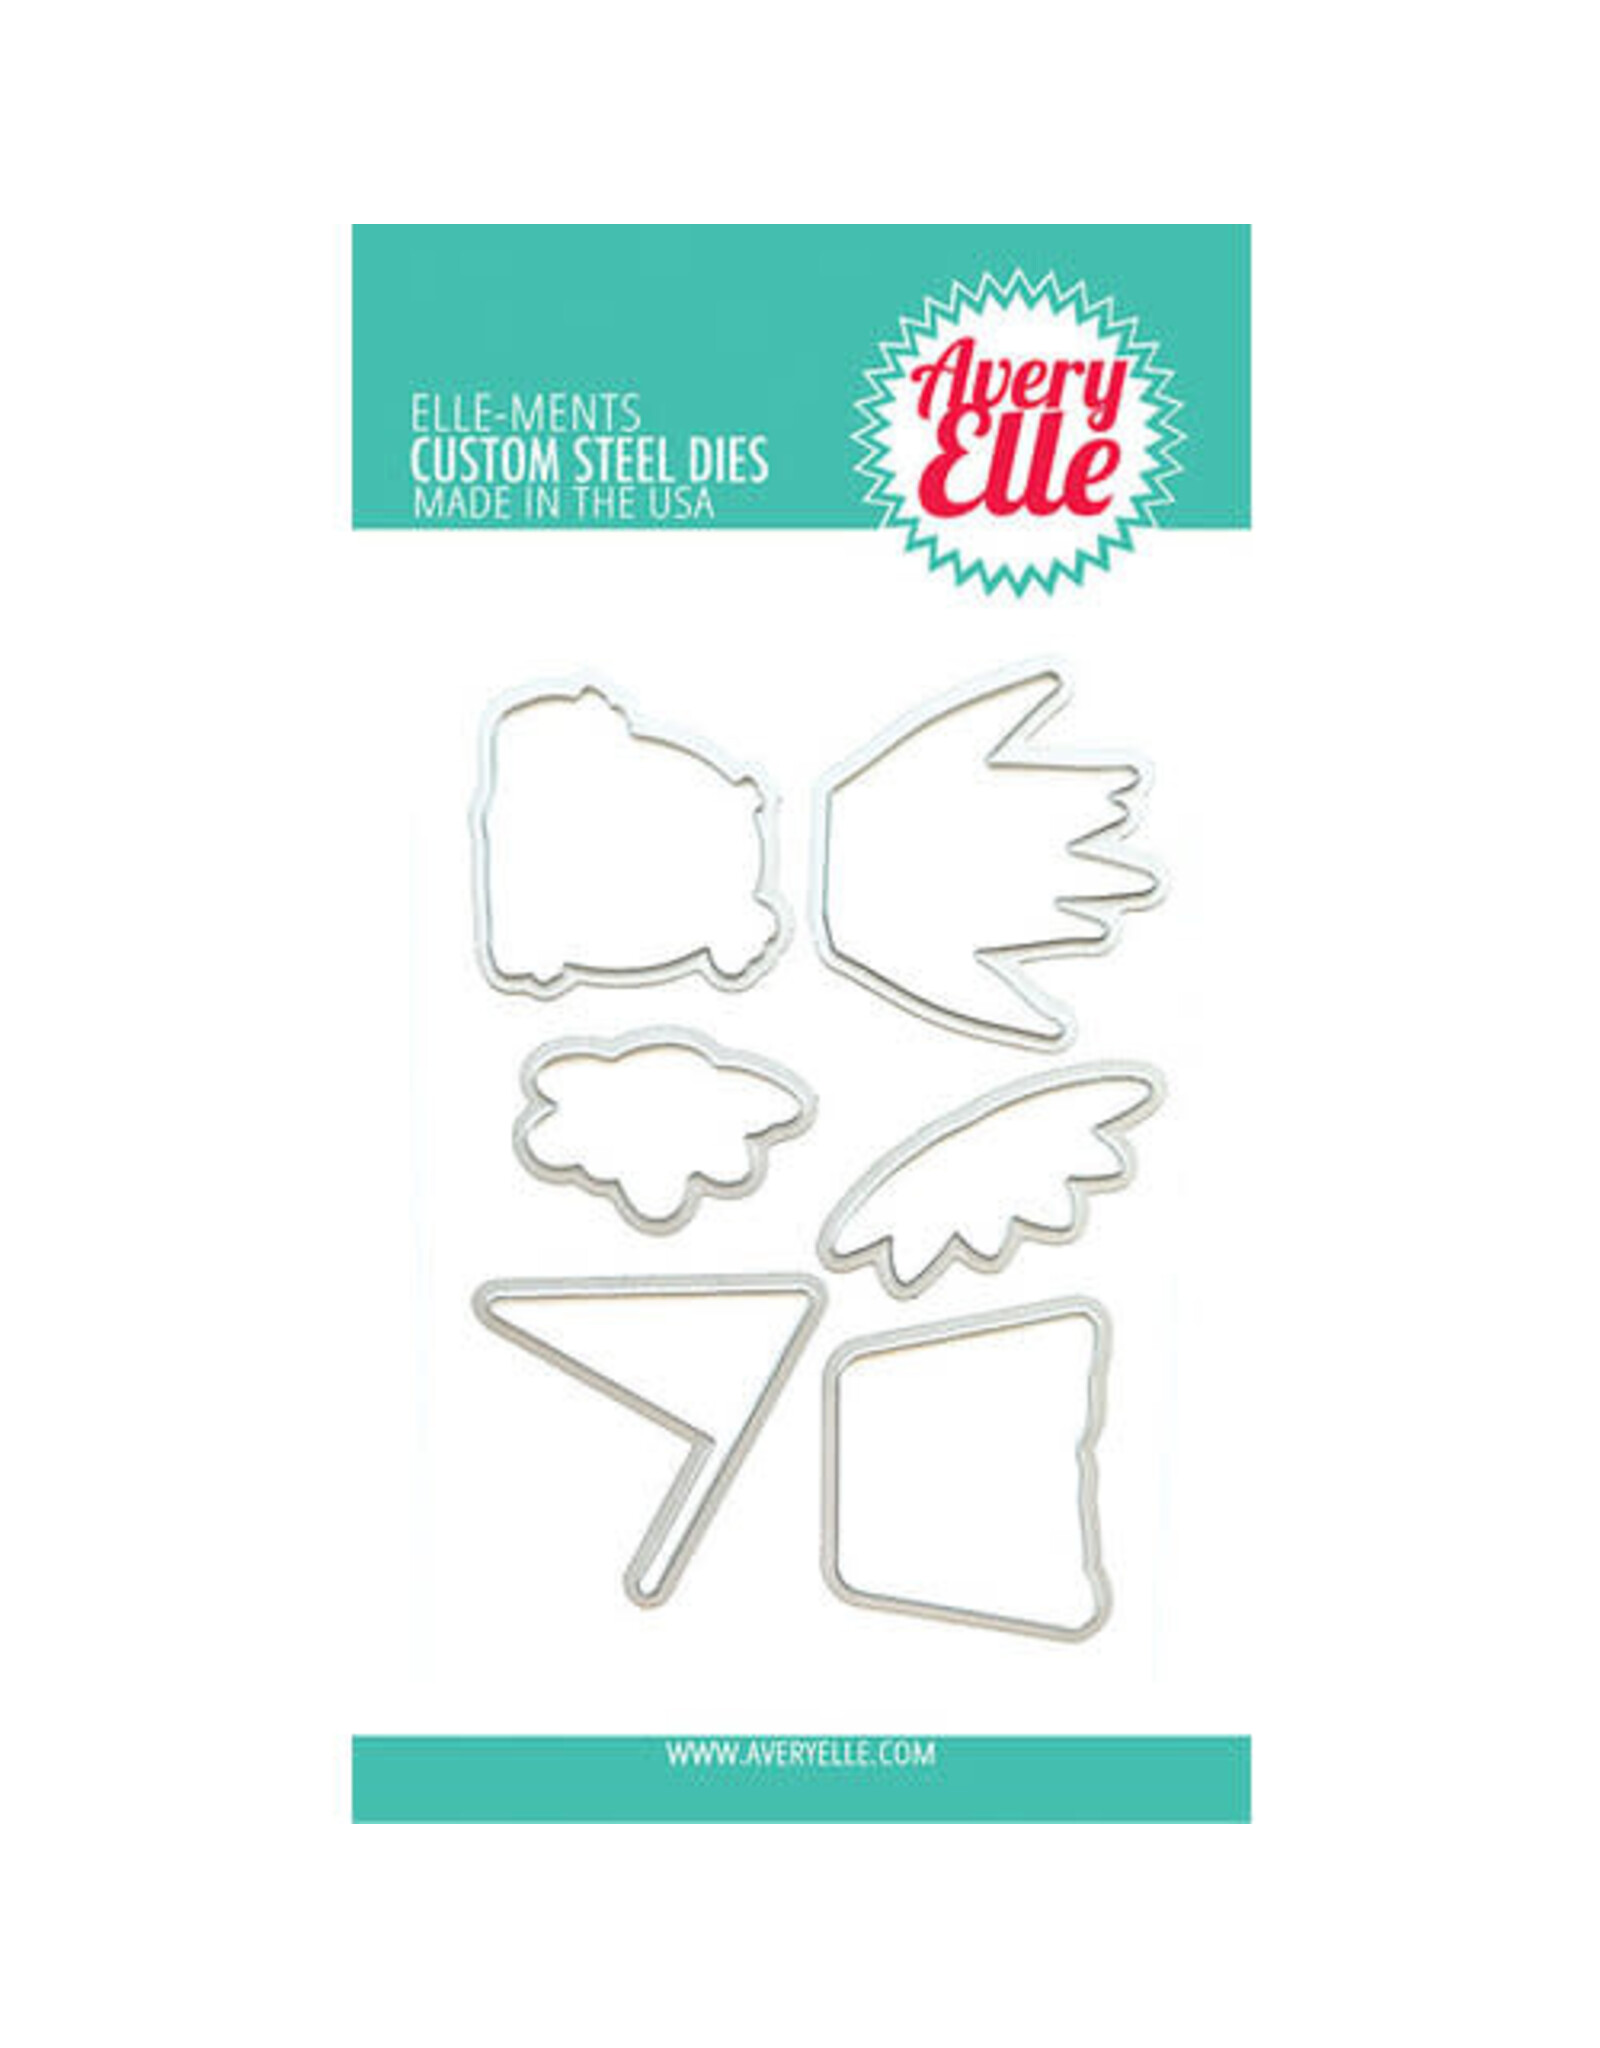 AVERY ELLE AVERY ELLE SUCCA FOR YOU CLEAR STAMP & DIE SET BUNDLE